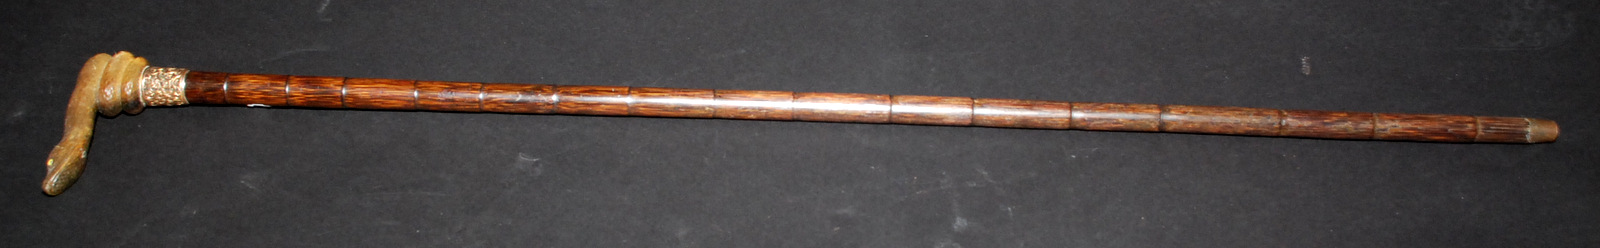 An late Victorian or Edwardian walking stick, the handle a coiled snake with glass eyes, length 93. - Image 2 of 13